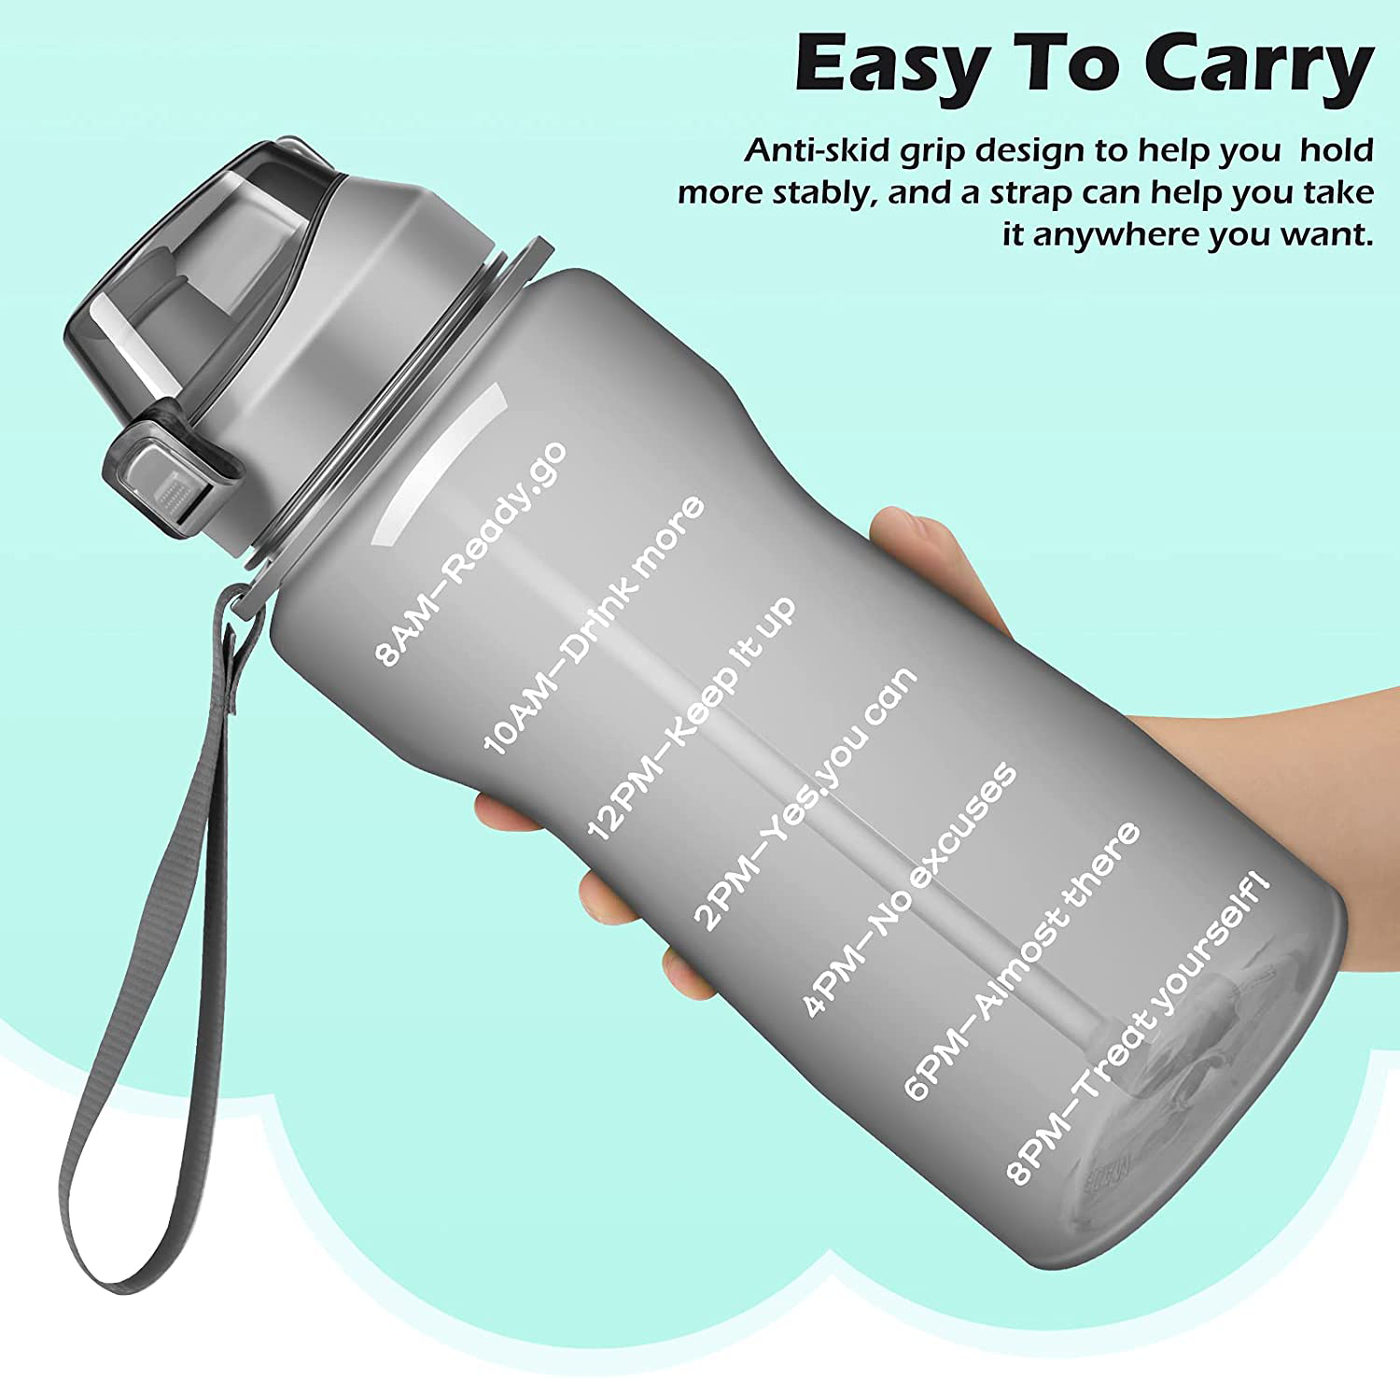 Ahape Gallon Motivational 64/100 oz Water Bottle with Time Marker & Straw, Large Daily Water Jug for Fitness Gym Outdoor Sports, Remind of All Day Hydration, Leak Proof, BPA Free (green, 100oz)